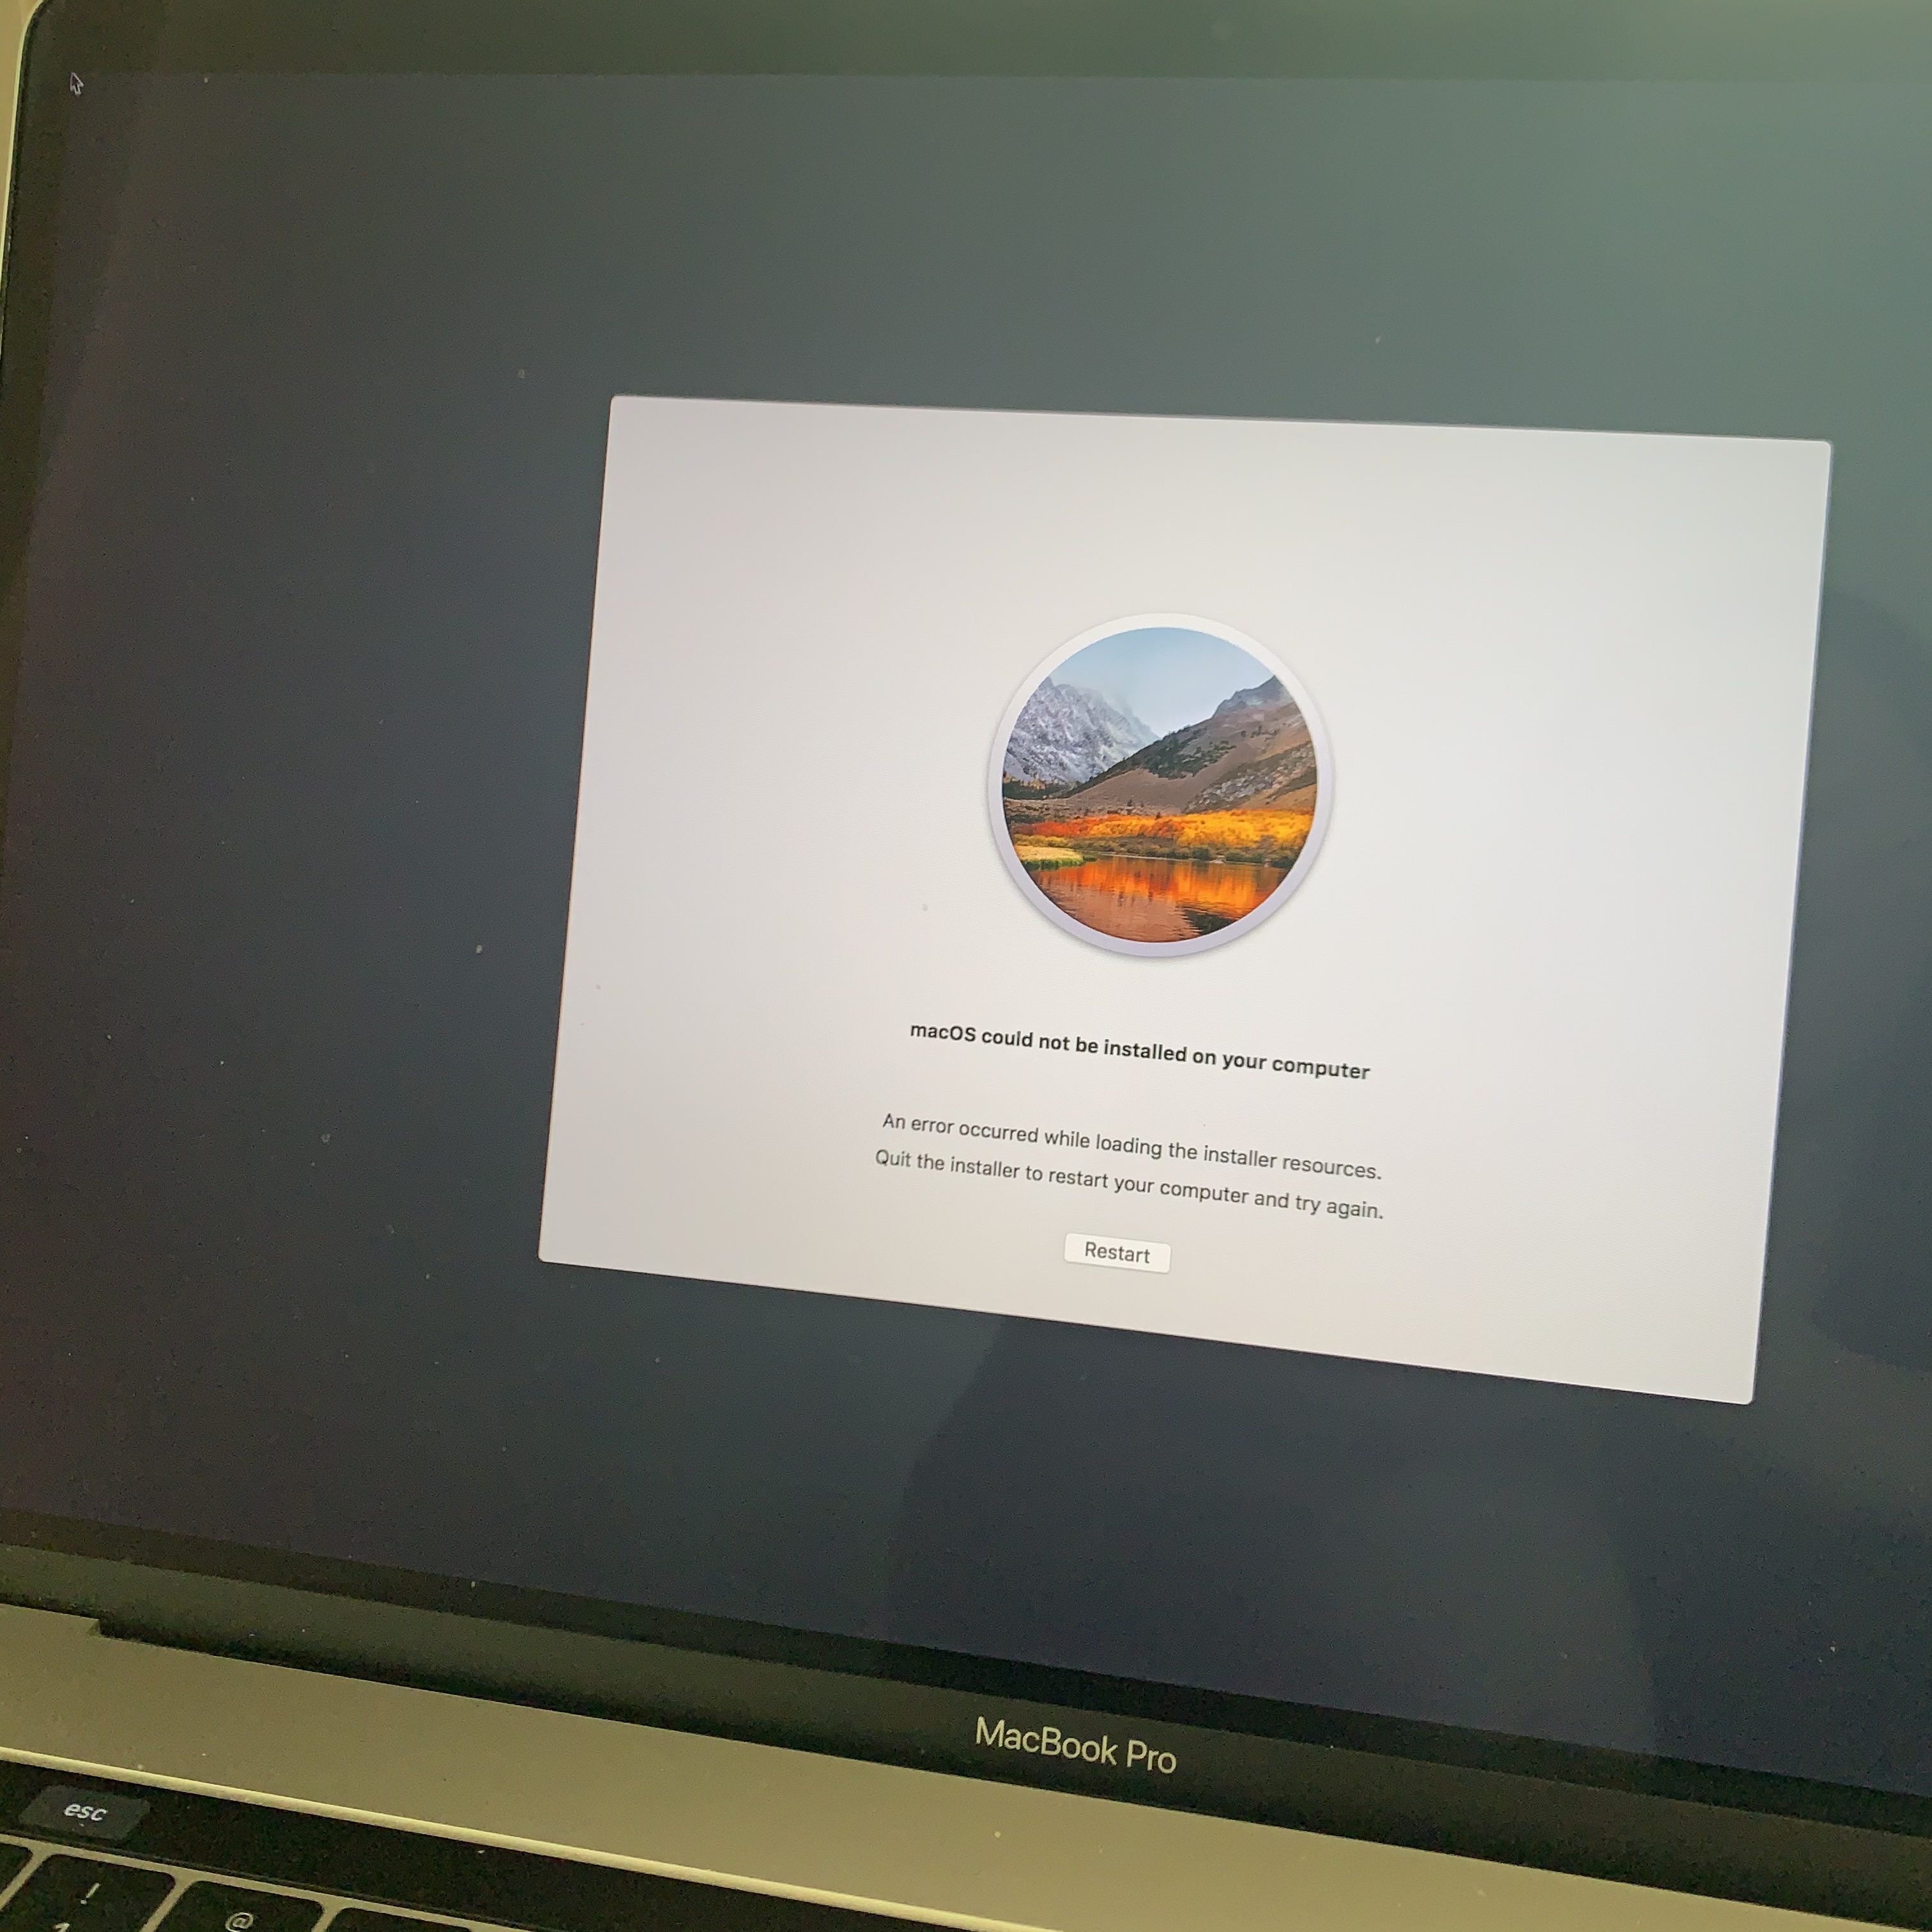 macos could not be installed on your computer hackintosh